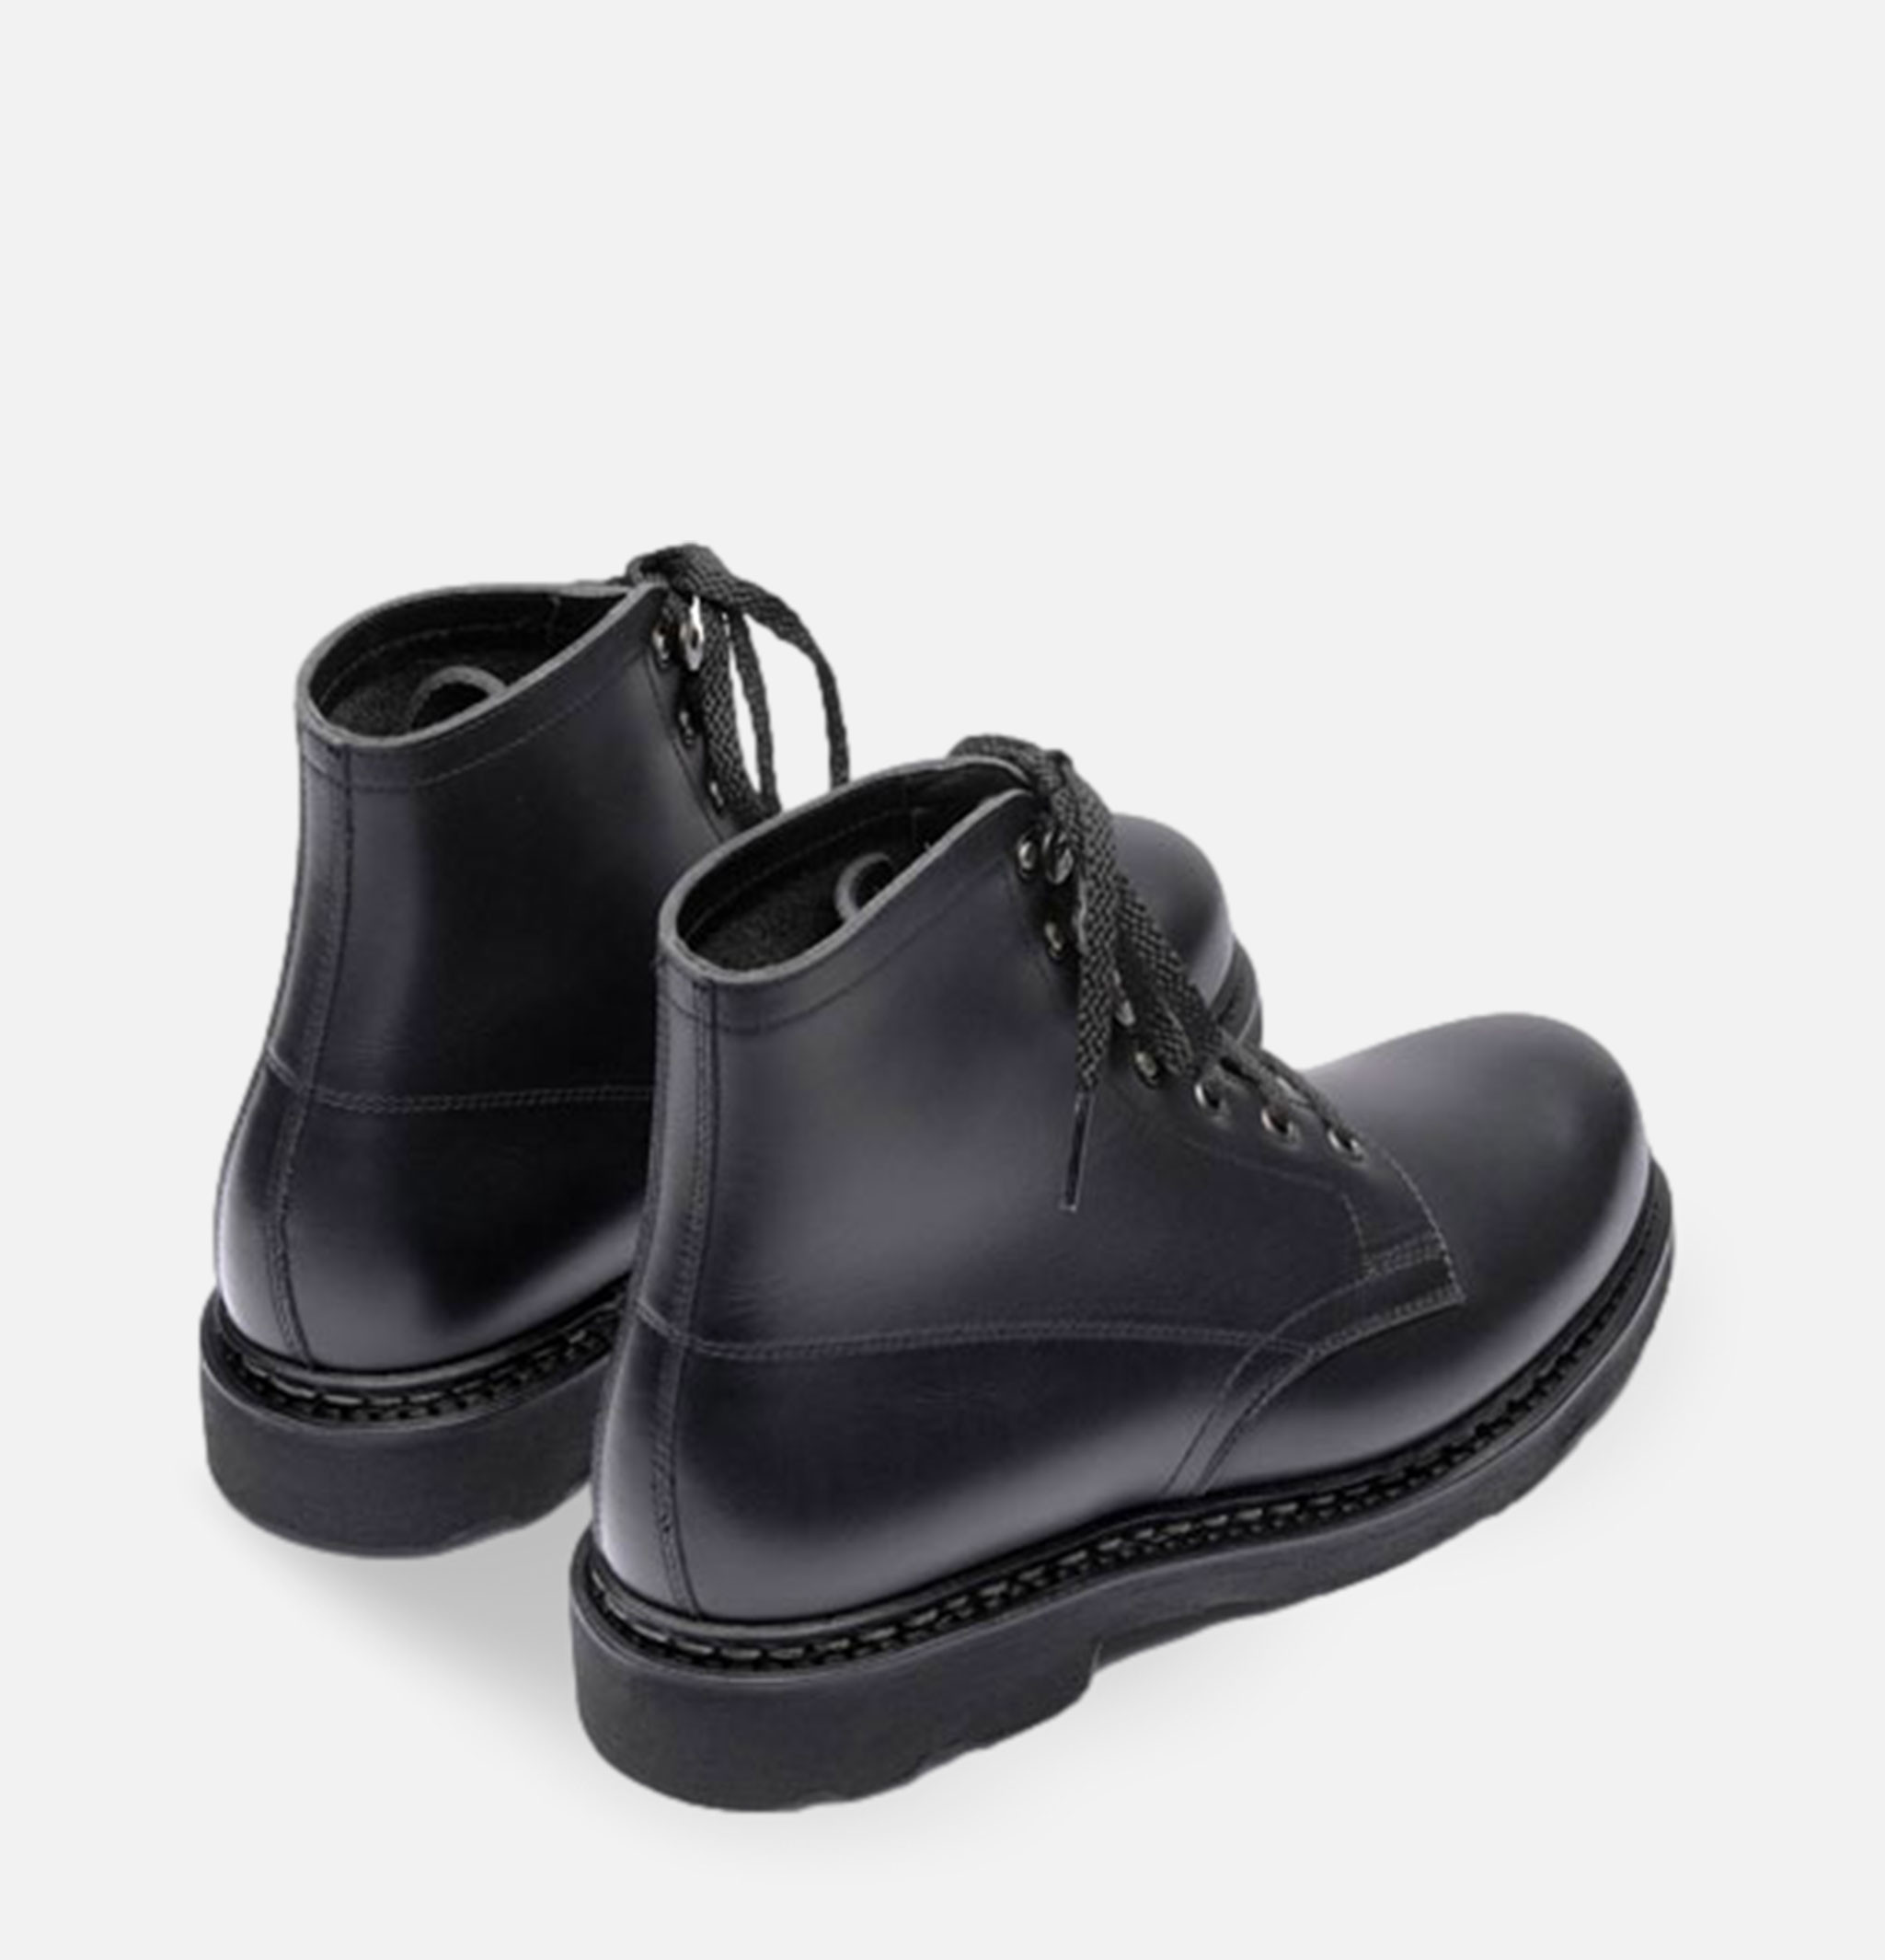 Paraboot Shoes Imbattable Black.